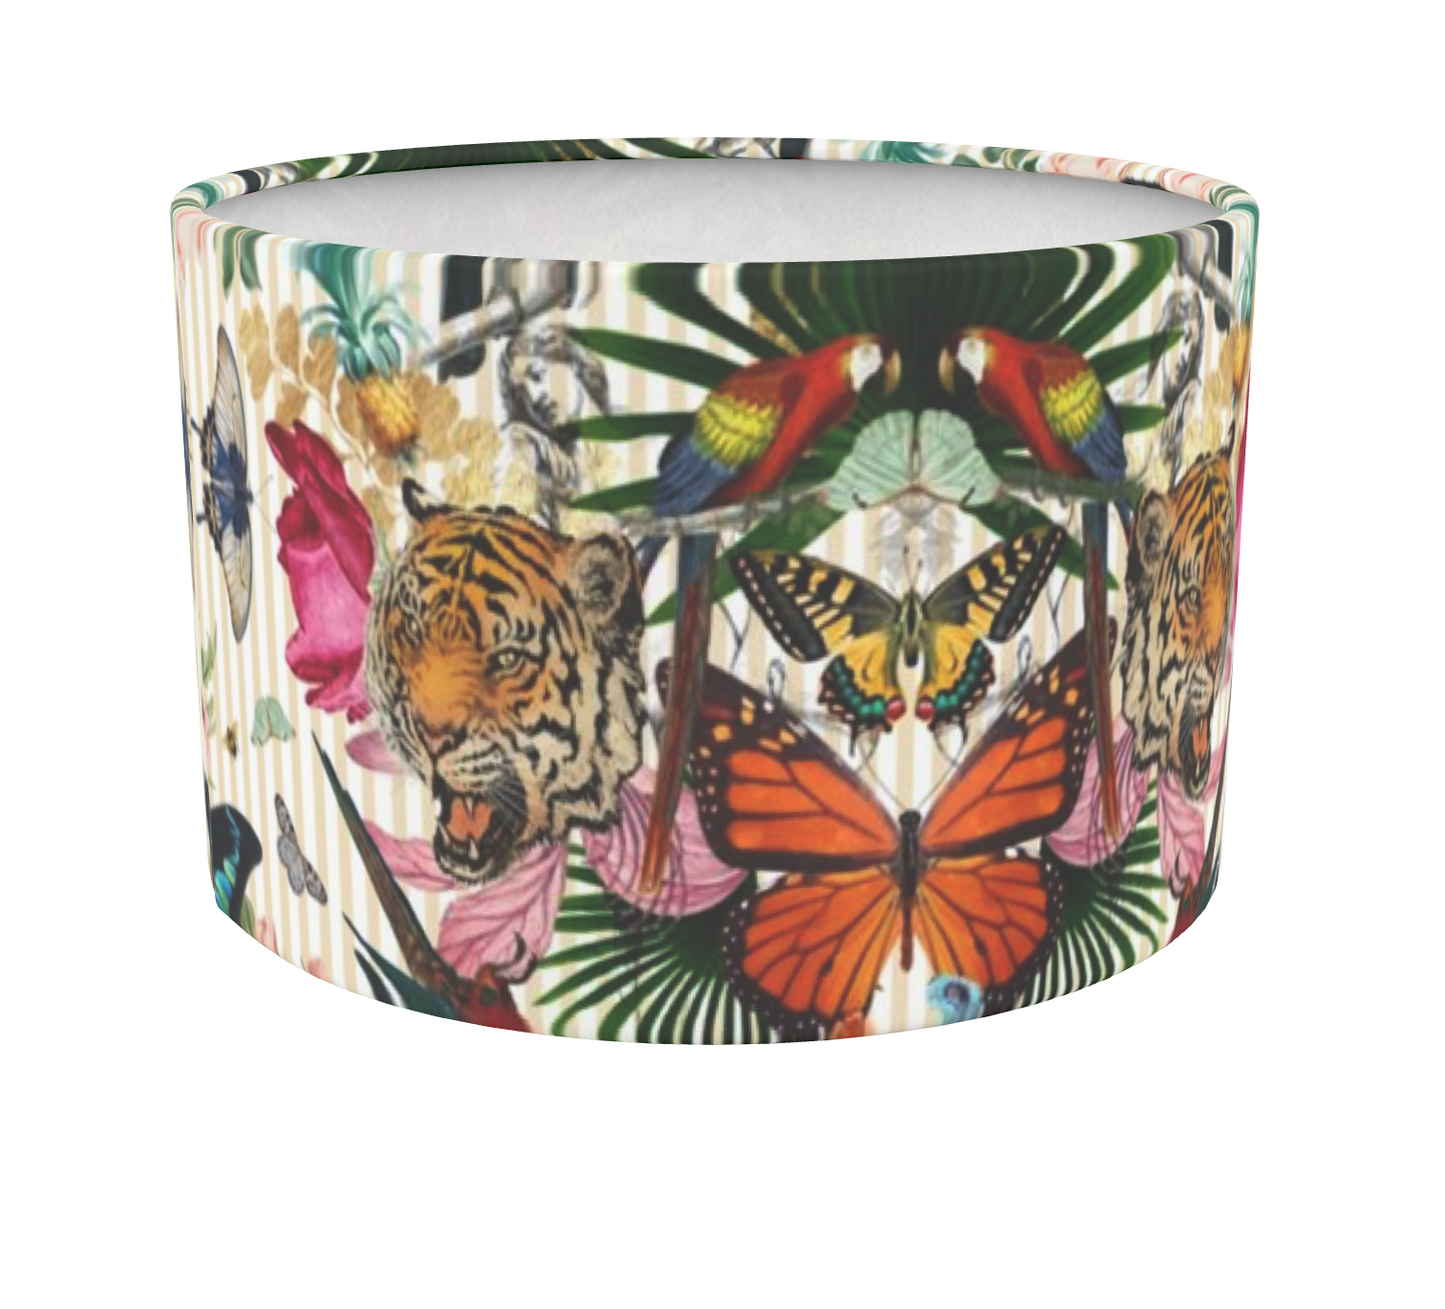 Paradise Lost 'Day' Drum Lamp Shade - Lux soft touch velvet